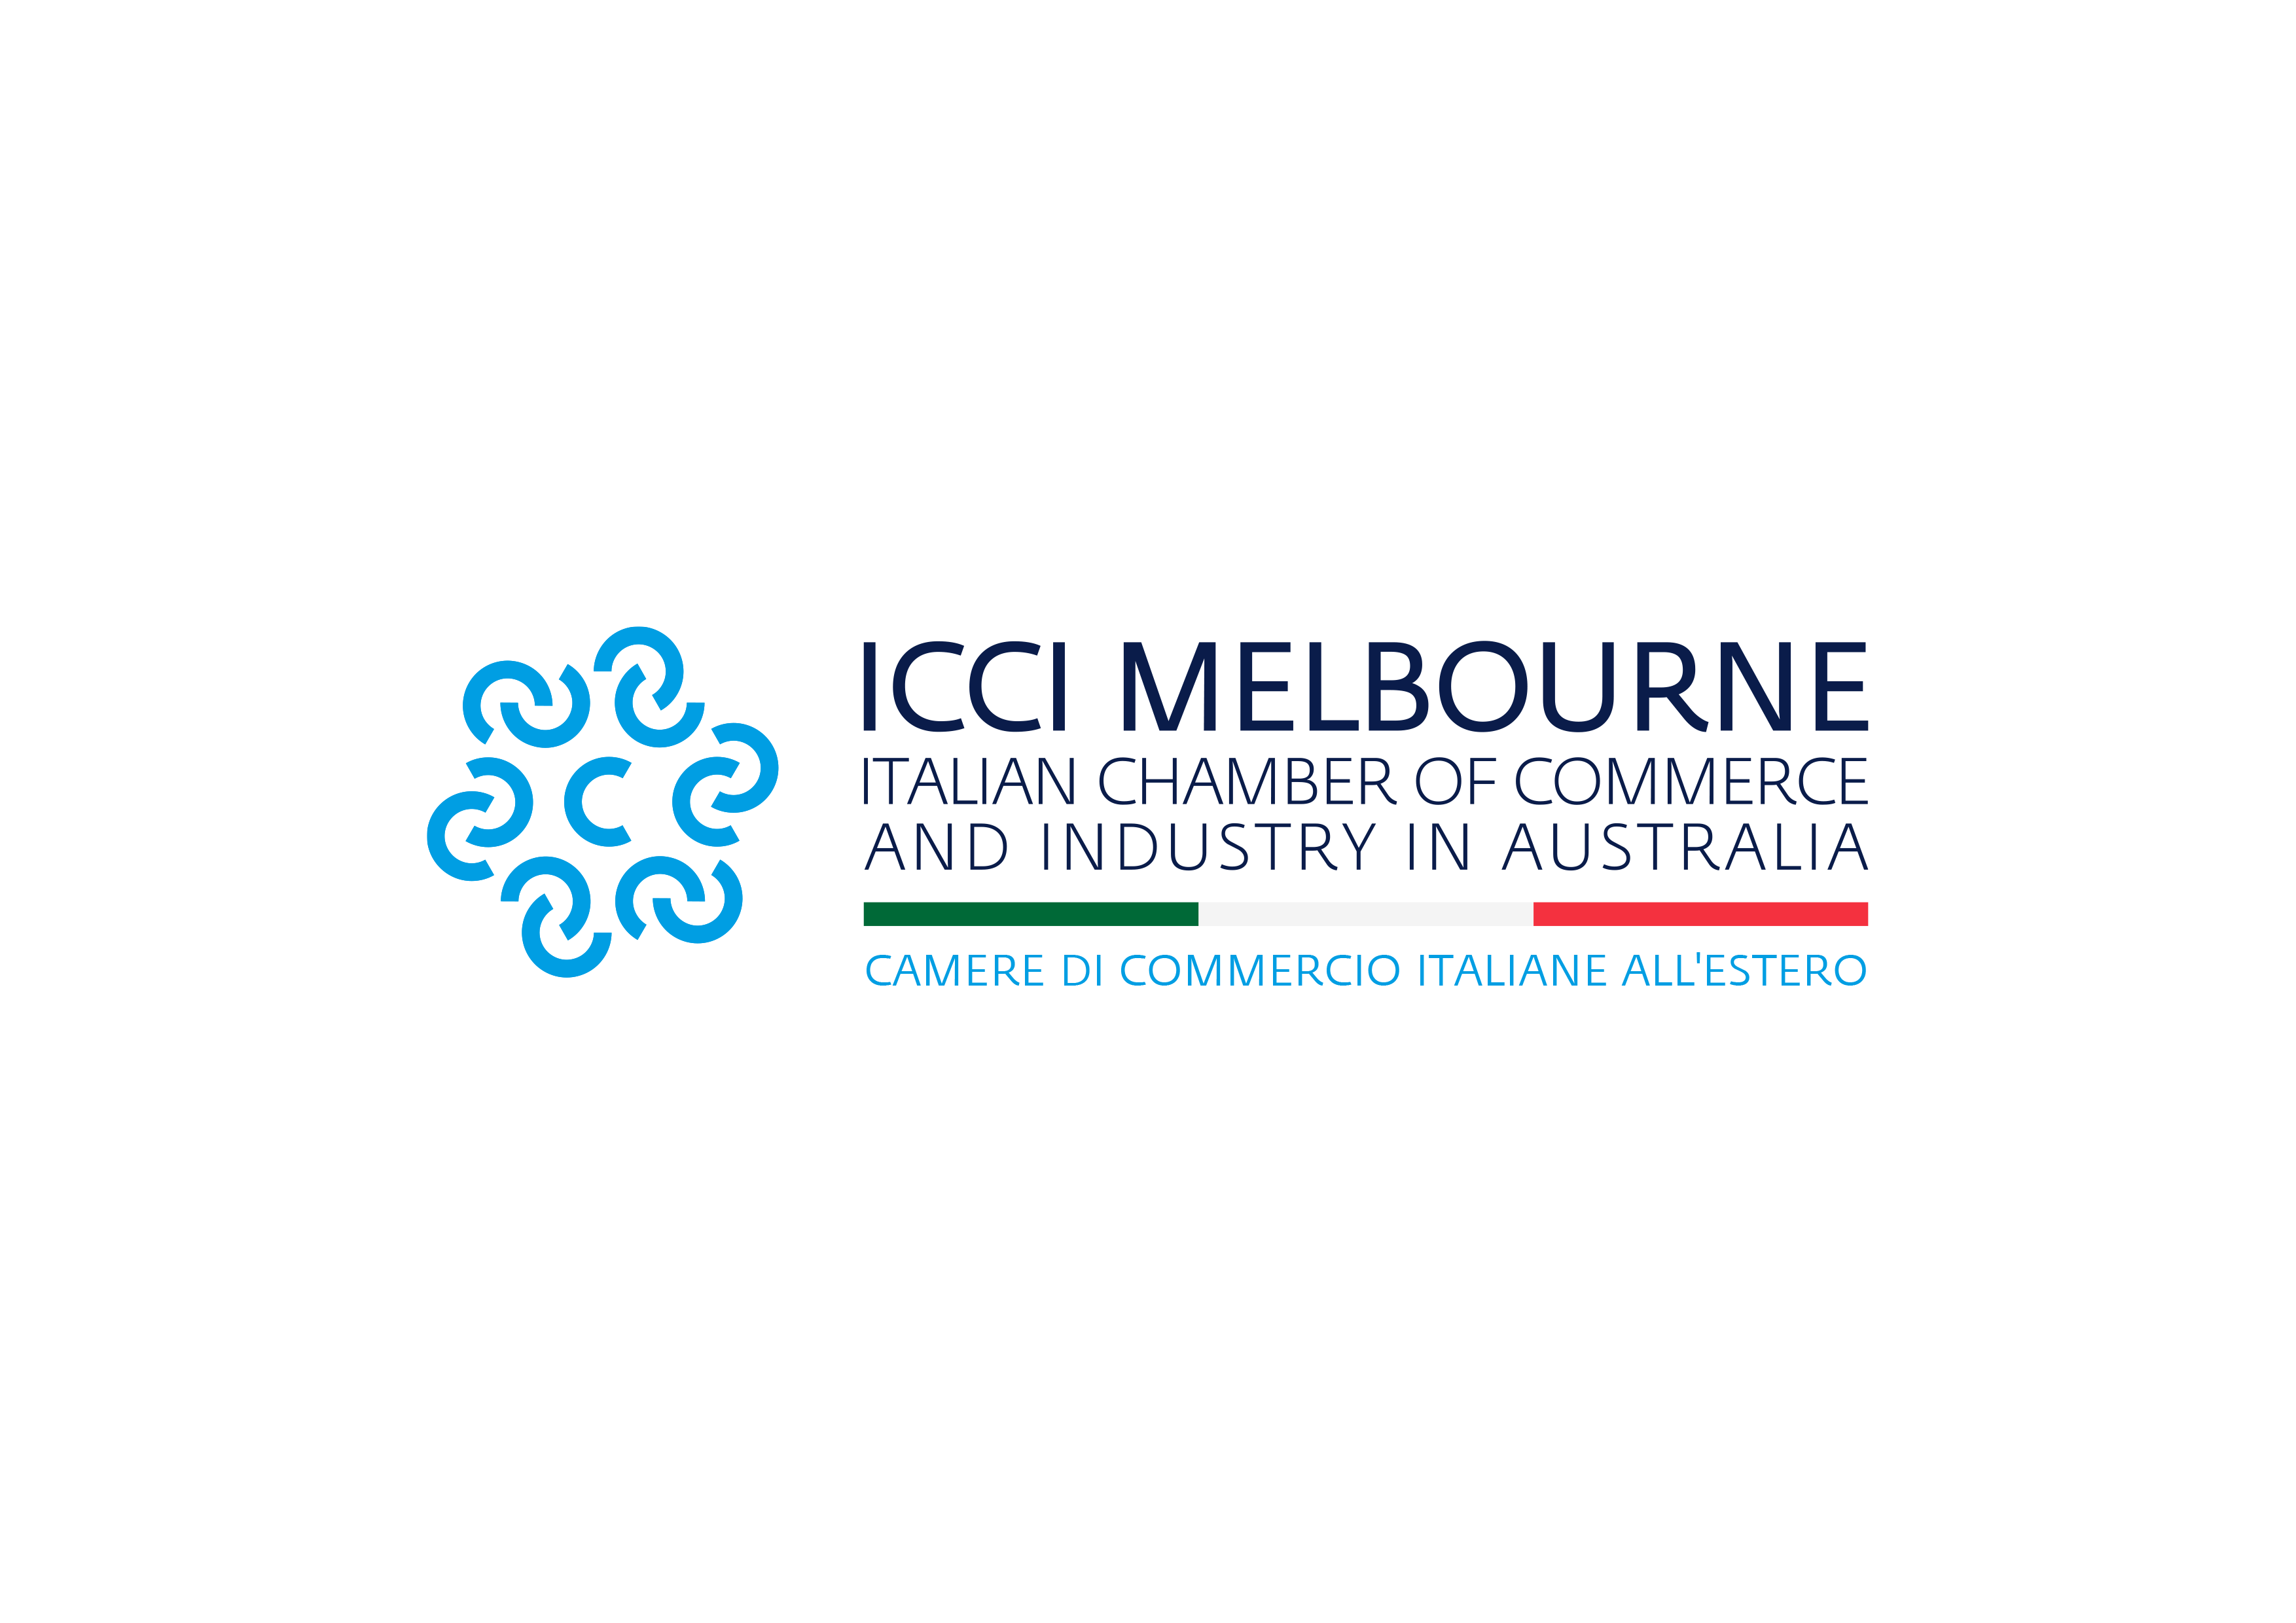 Italian Chamber of Commerce and Industry in Australia - Melbourne Inc.